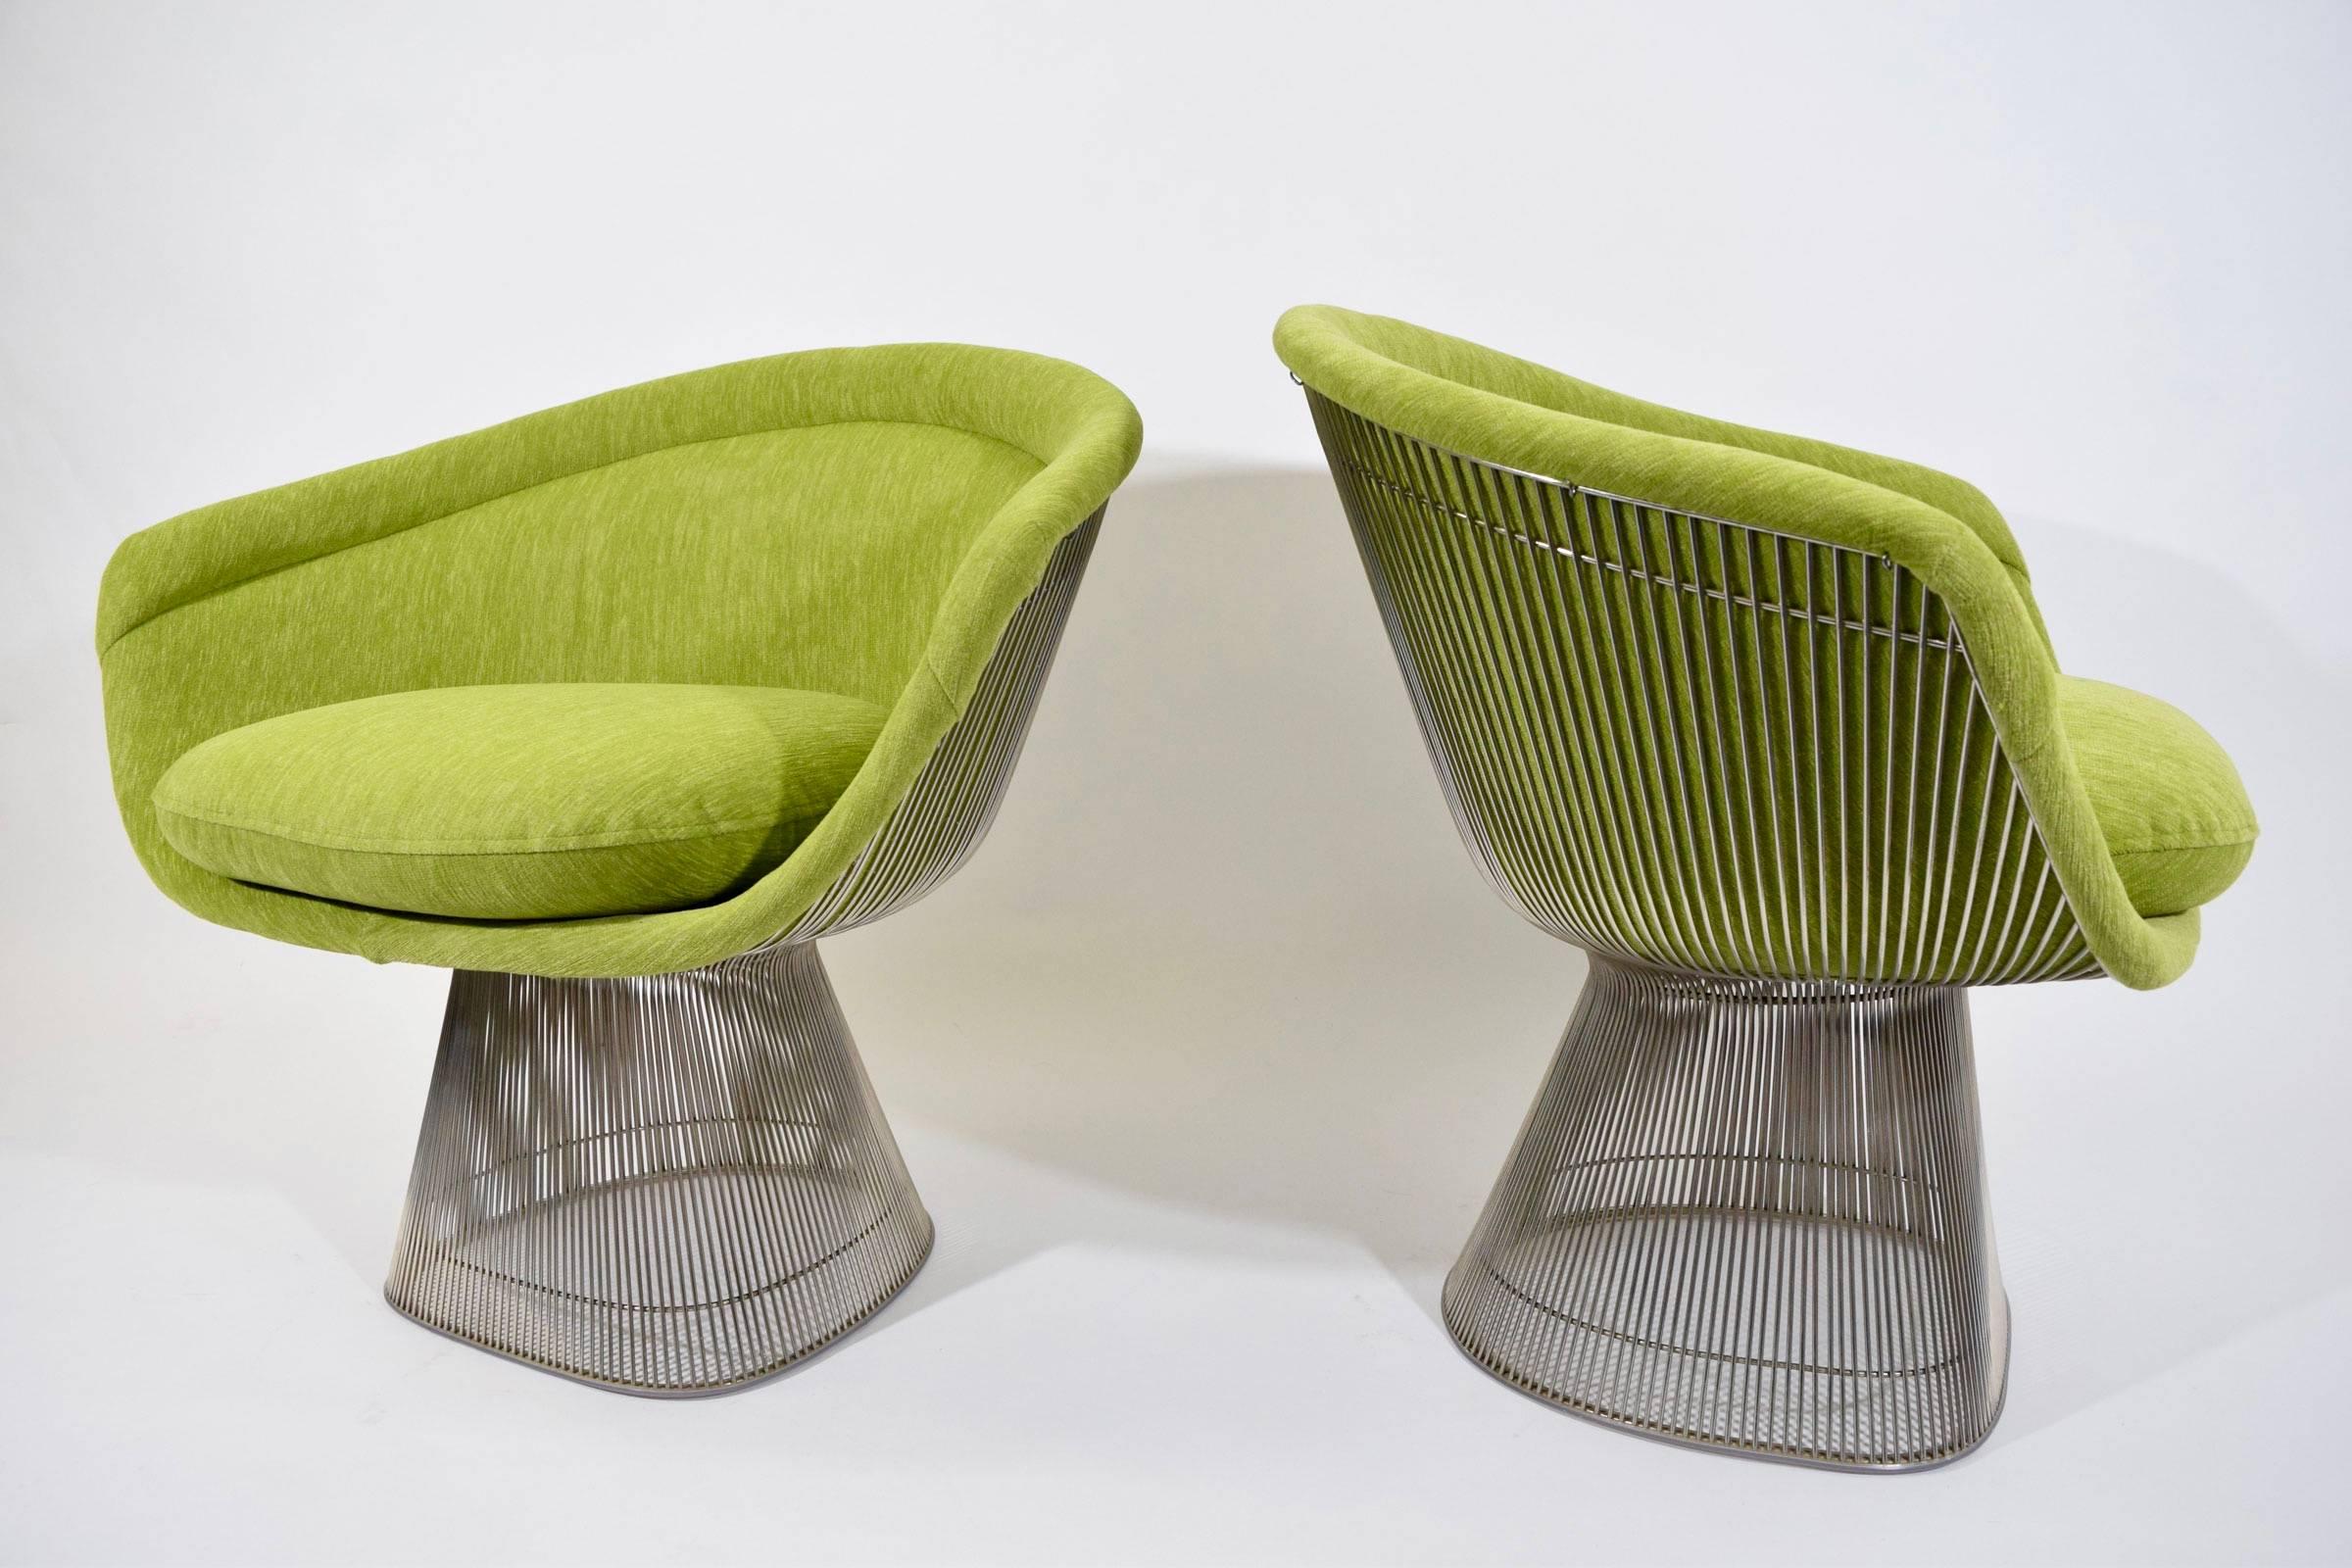 A beautiful pair of nickel-plated lounge chairs by Warren Platner for Knoll. The chairs have been newly upholstered in a bright green fabric by Holly Hunt Great Outdoors so they are easily cleanable.